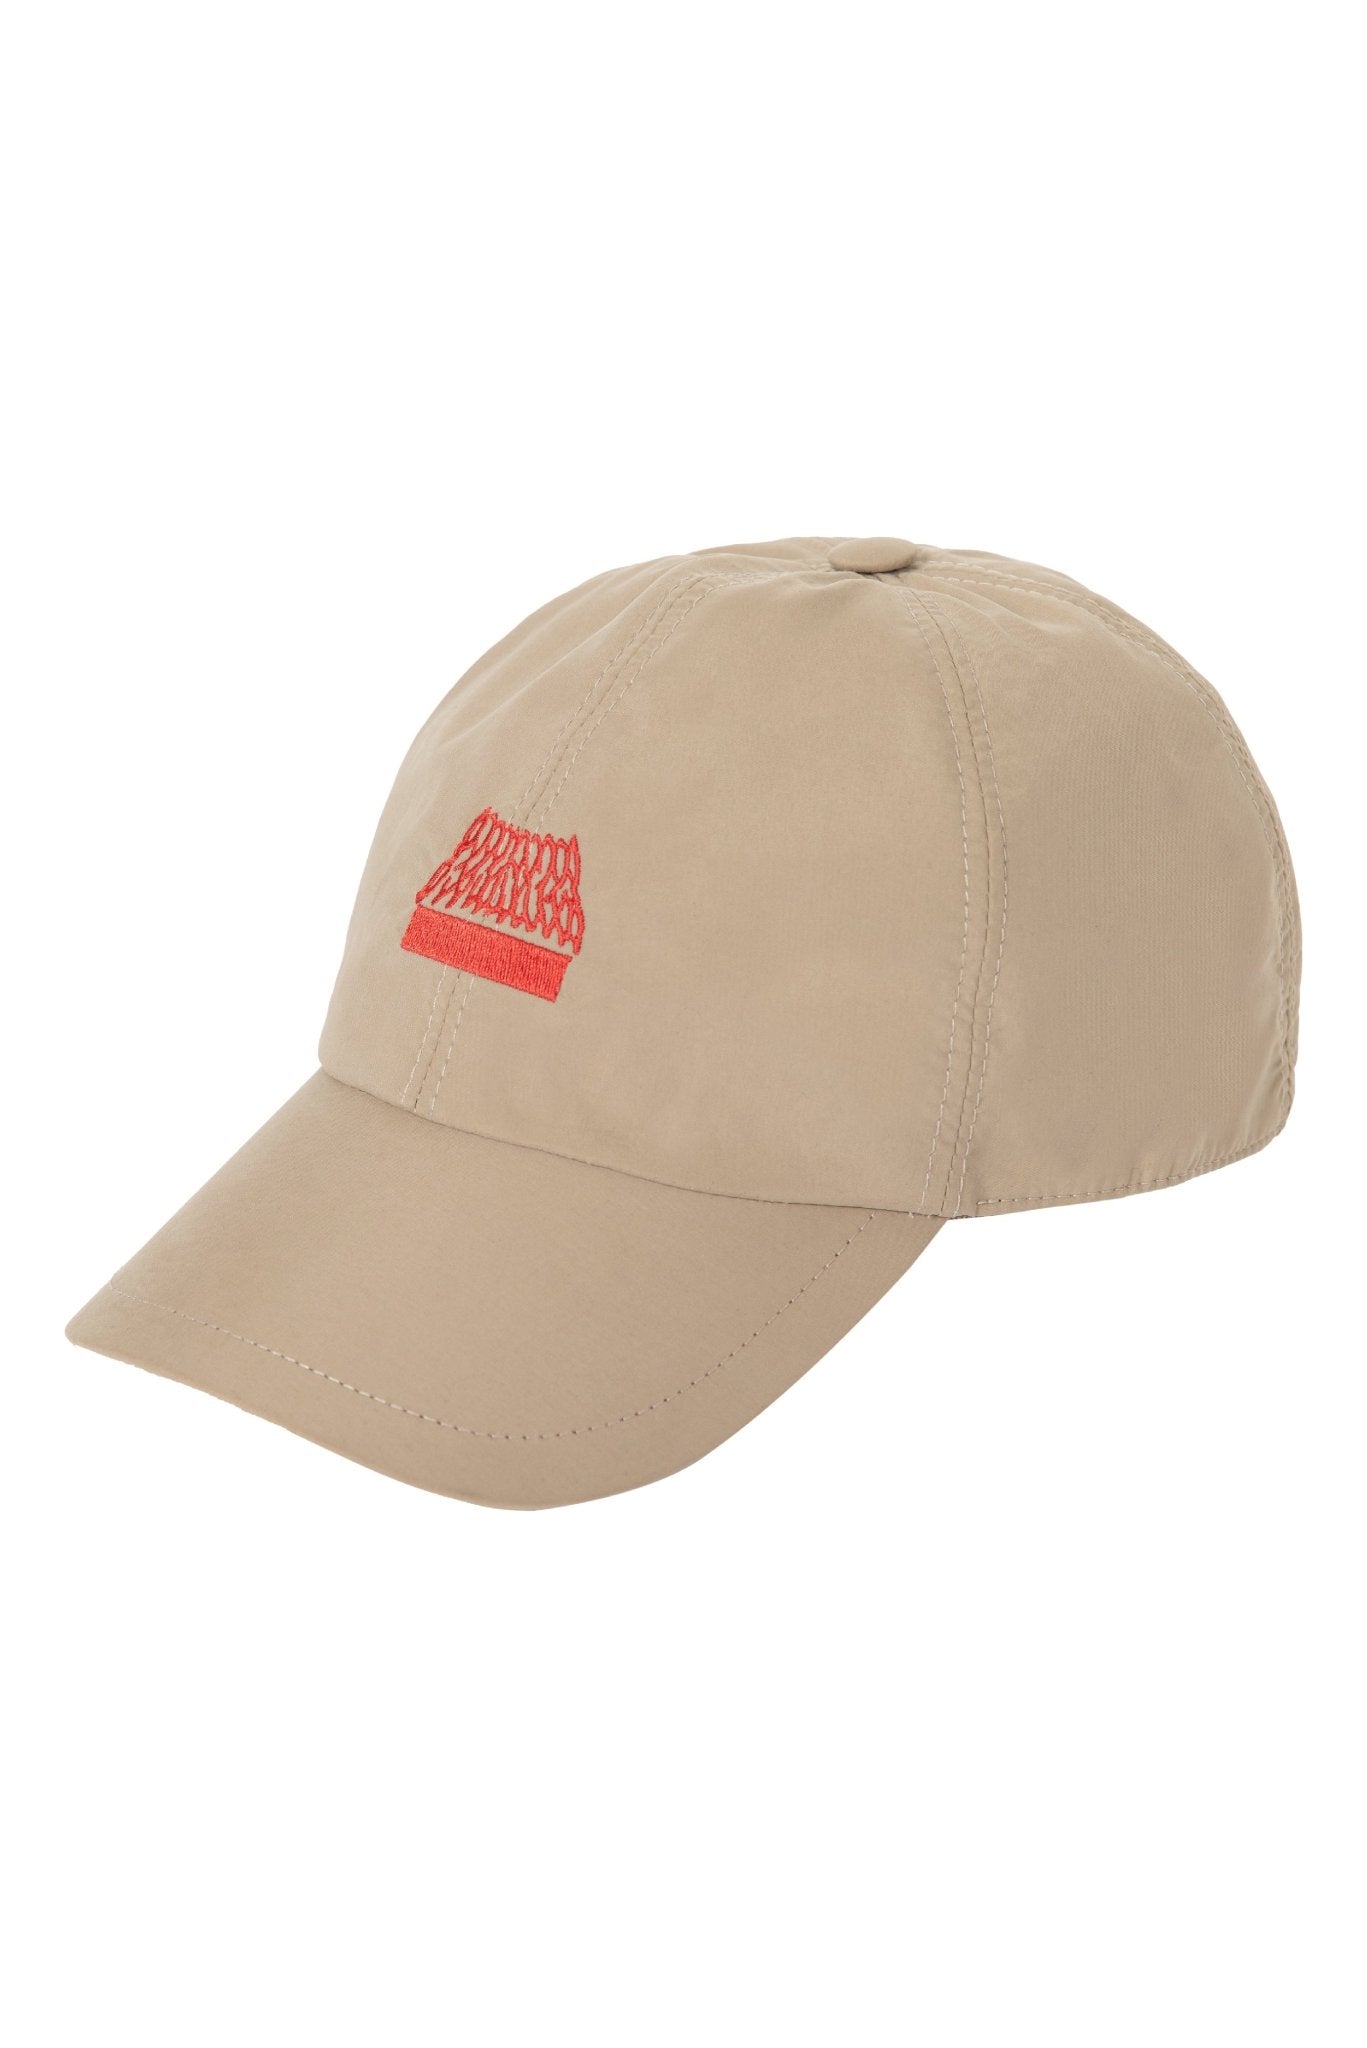 Beige baseball cap with orange embroidered logo by CREST, made from 100% waterproof fabric.